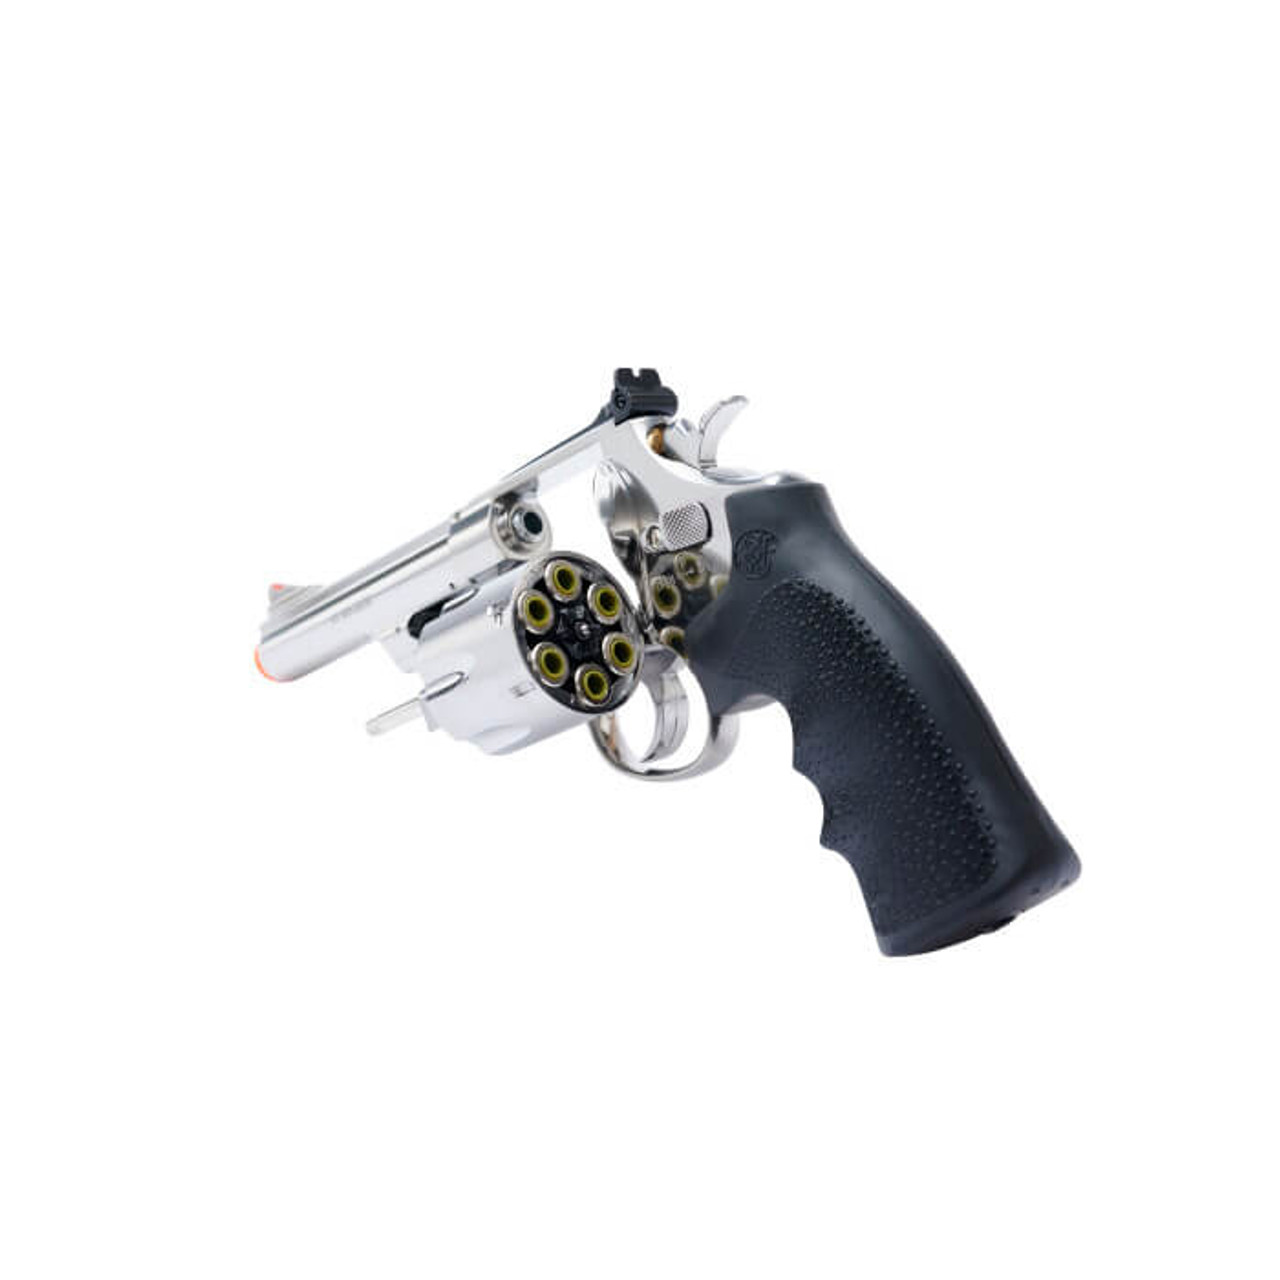 S&W M29 5 INCH BARREL CO2 AIRSOFT REVOLVER - CLASSIC CHROME FINISH - MiR  Tactical